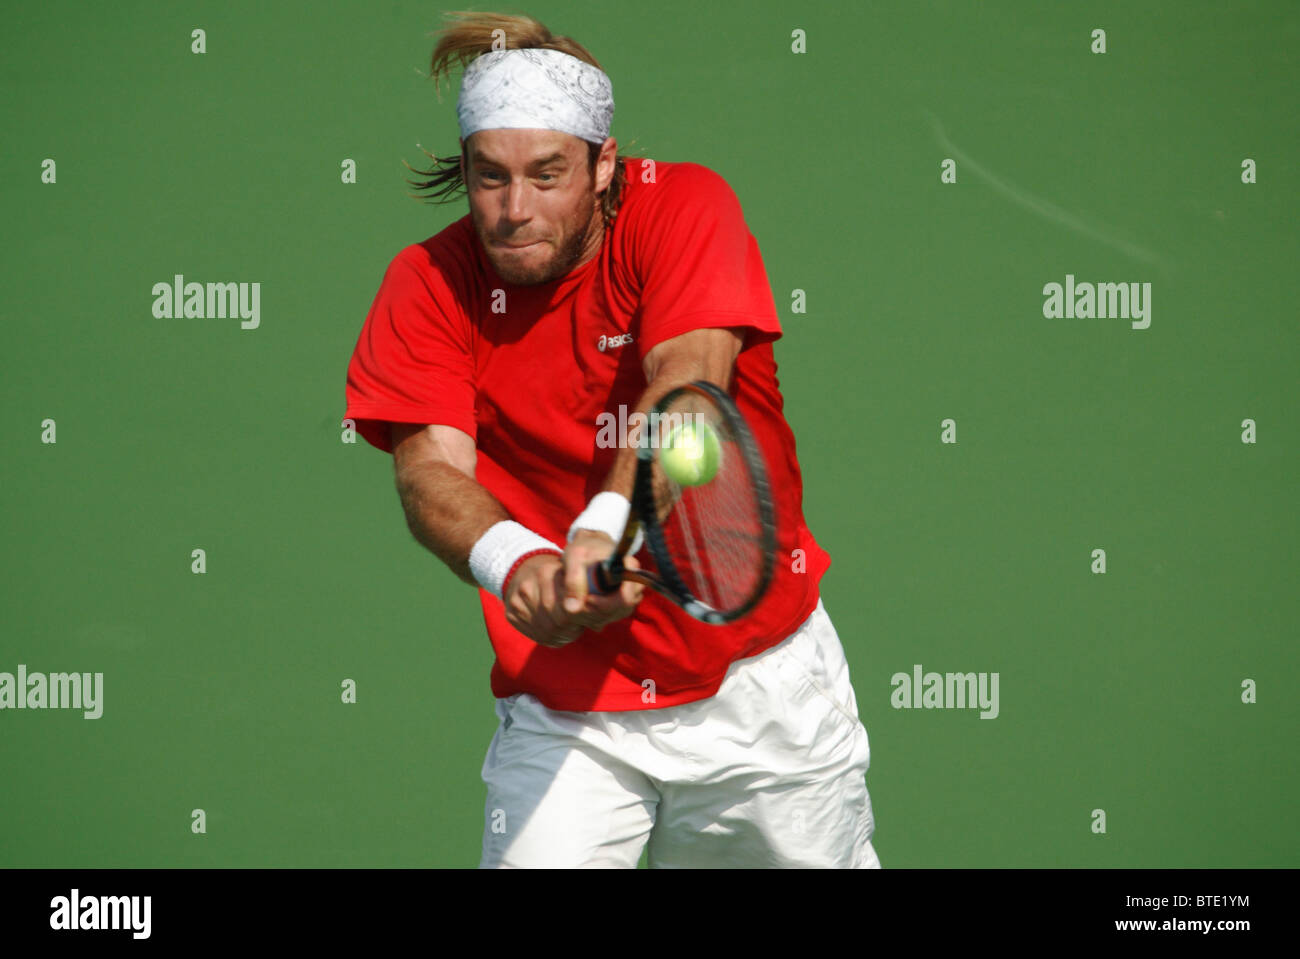 George Bastl of Switzerland returns a serve during a qualifying match at the Legg Mason Tennis Classic July 28, 2007. Stock Photo